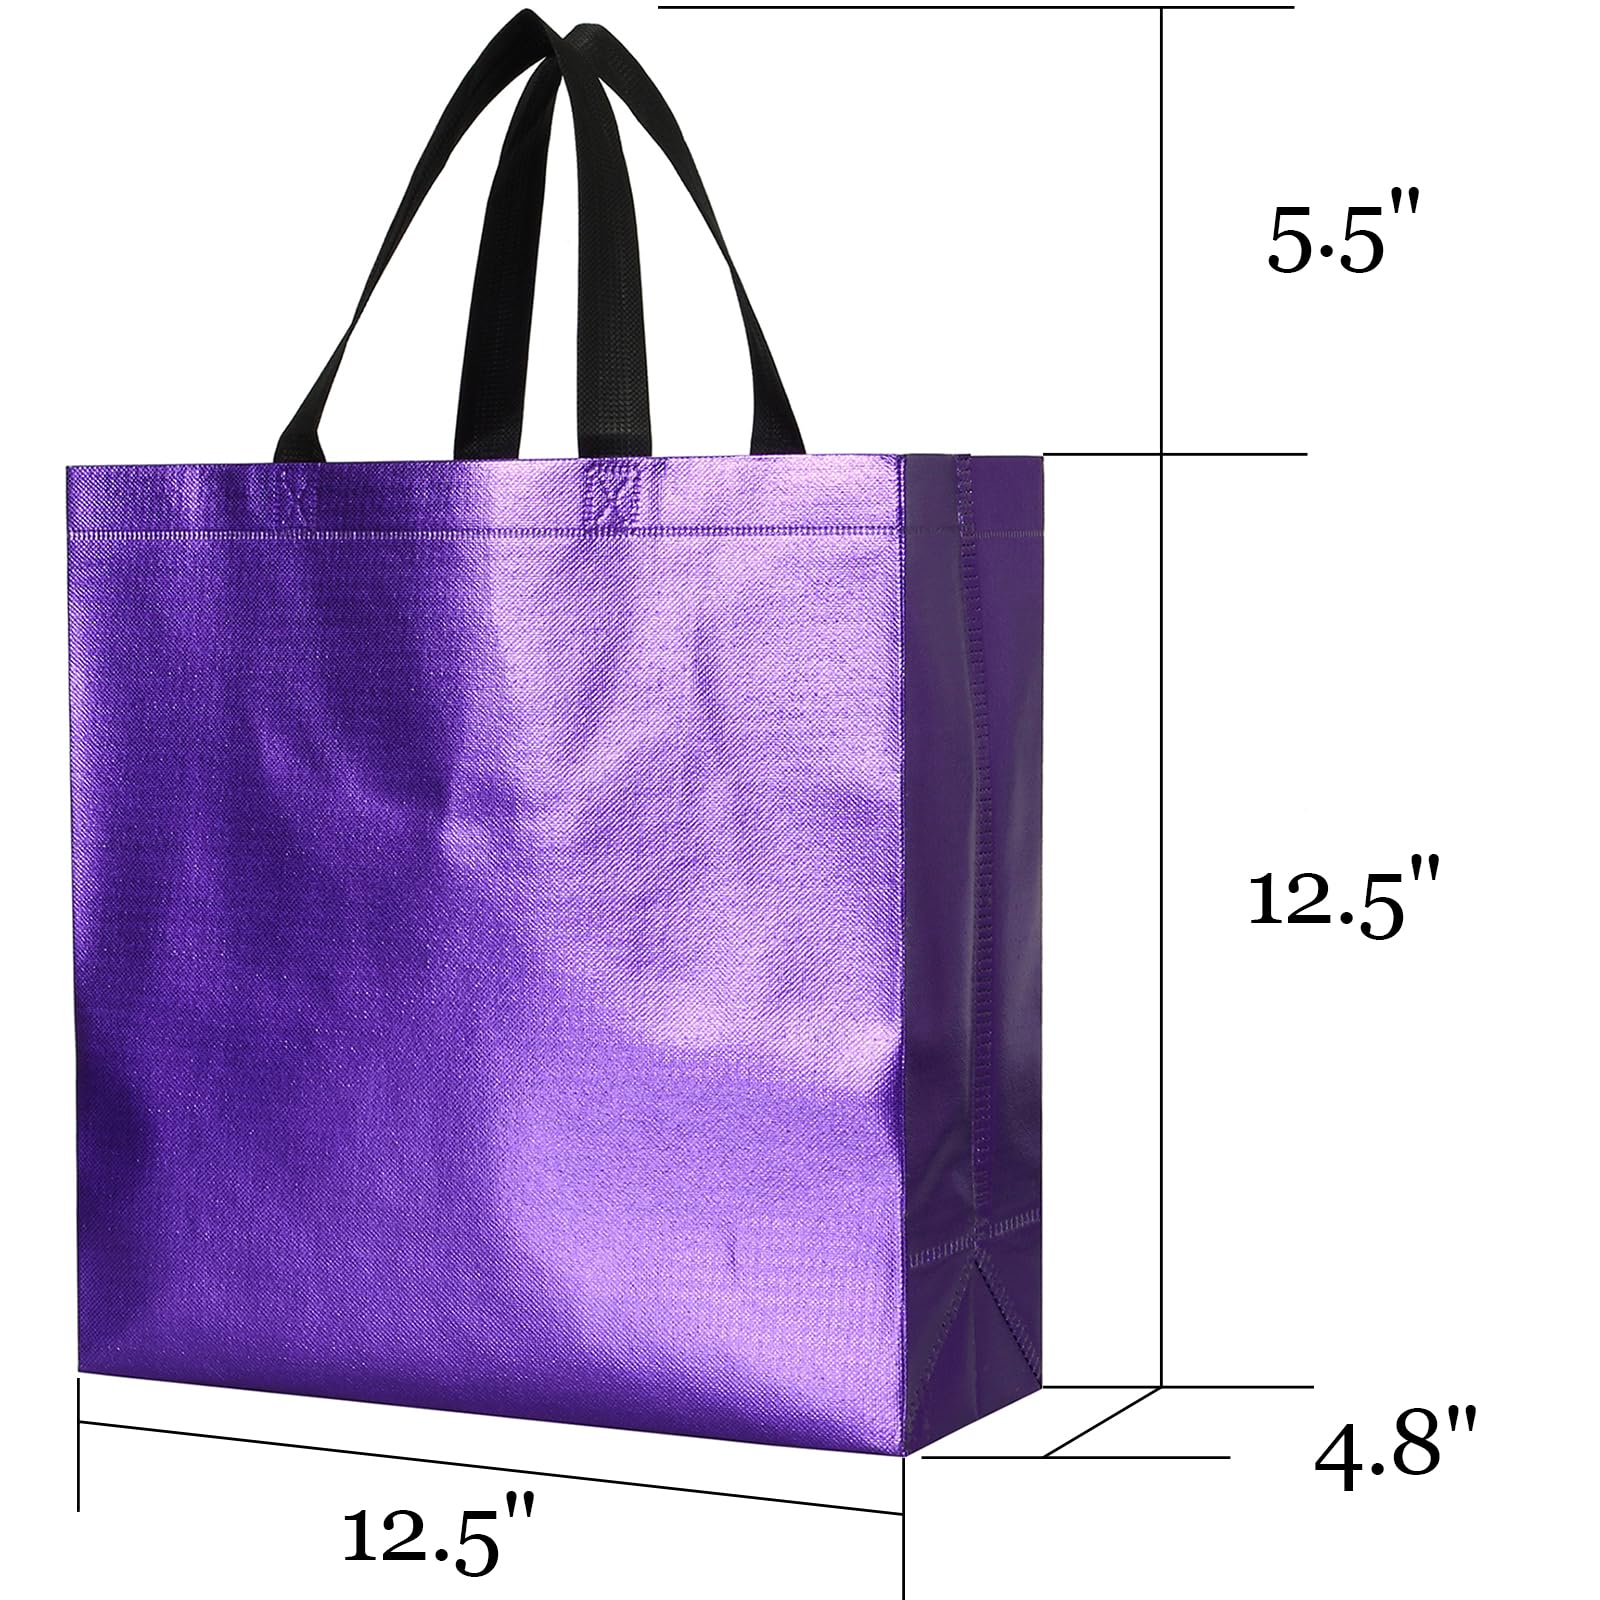 Tosnail 20 Packs Large Reusable Gift Bags with Handles, Purple Party Favor Bags, Shopping Tote Bag, Goodie Bags Present Bag for Weddings, Birthdays, Party, Event - Purple